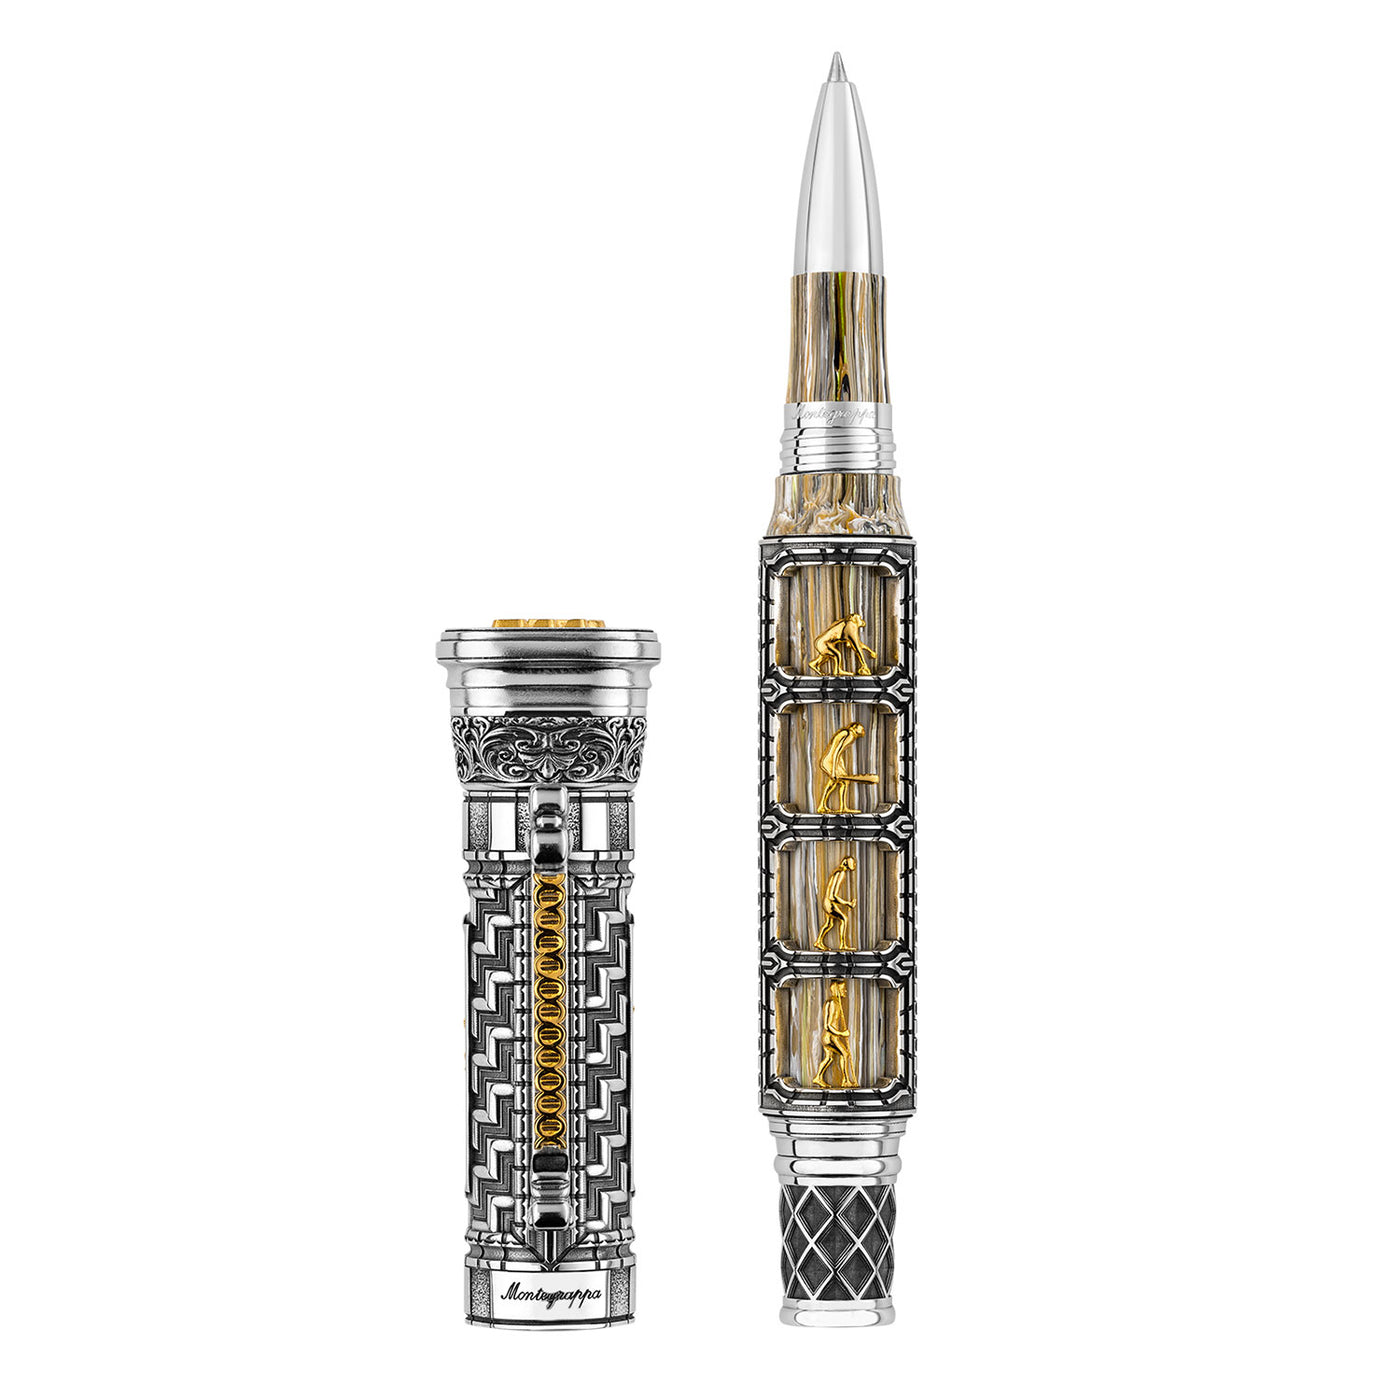 Montegrappa Theory of Evolution Roller Ball Pen - Avanguardia (Limited Edition) 2